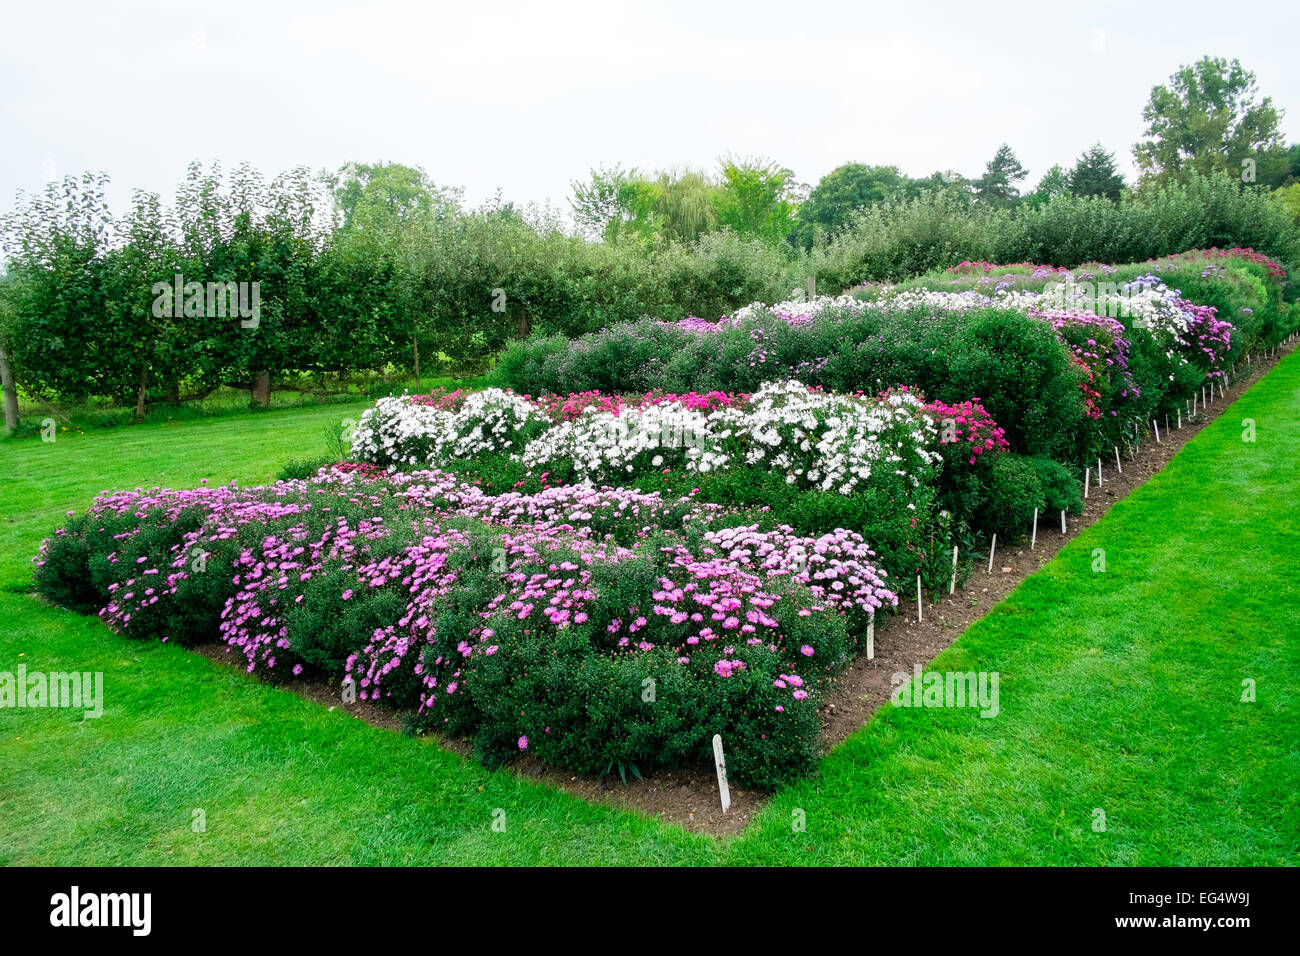 Variety of flowering asters in garden flower bed Stock Photo